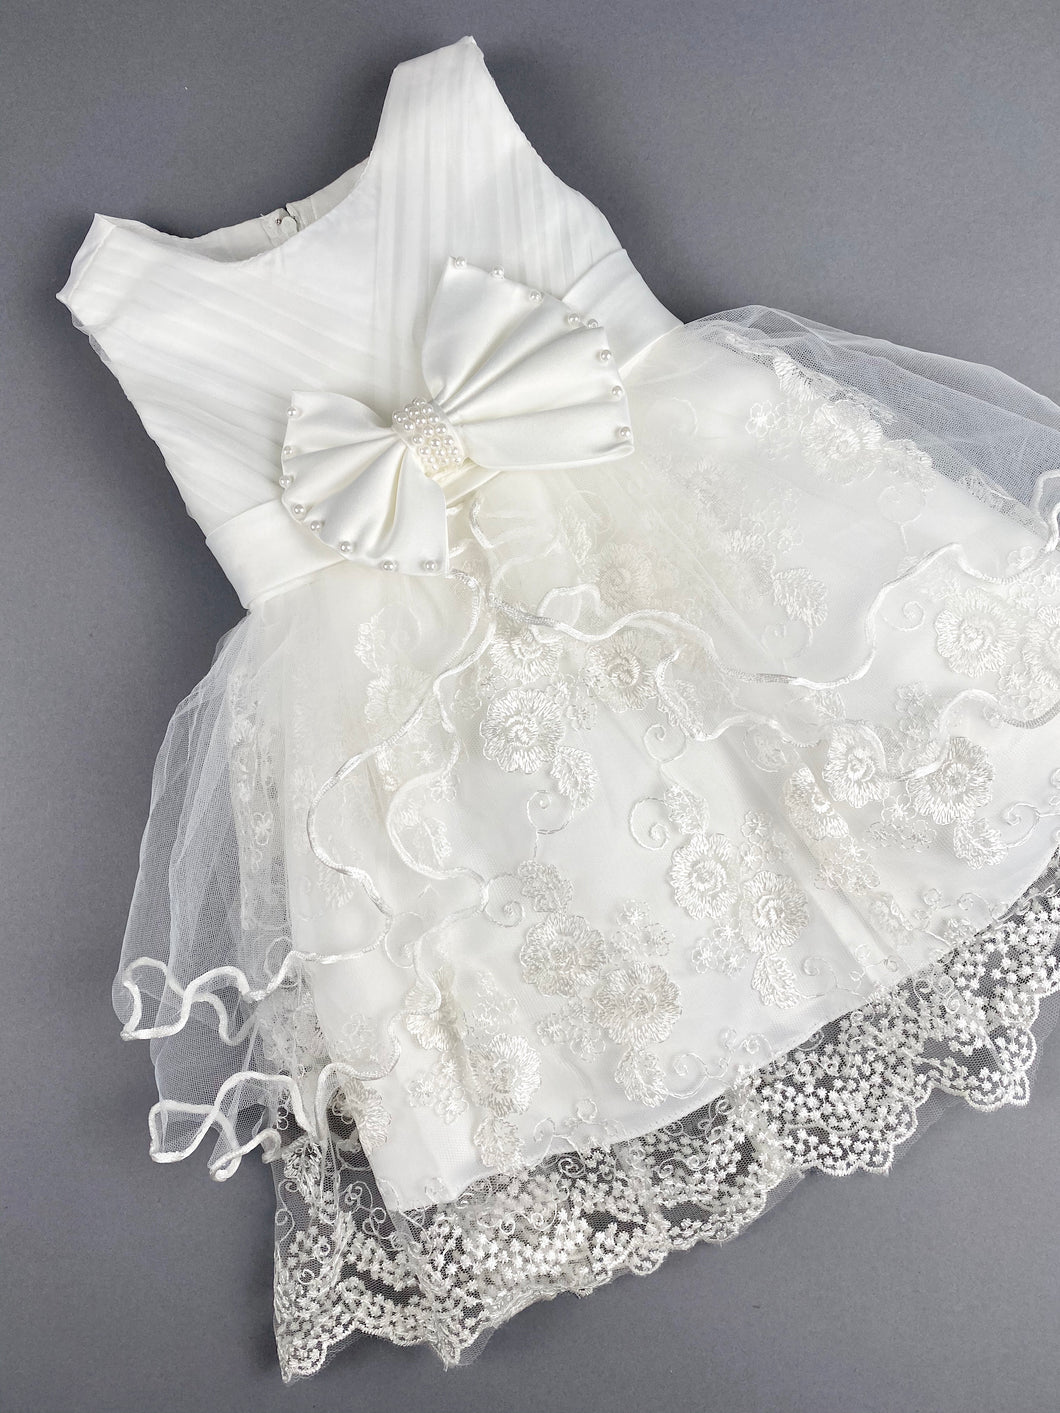 Girls Christening Baptismal Embroidered Dress 44 with Pearl Accent Bow Belt